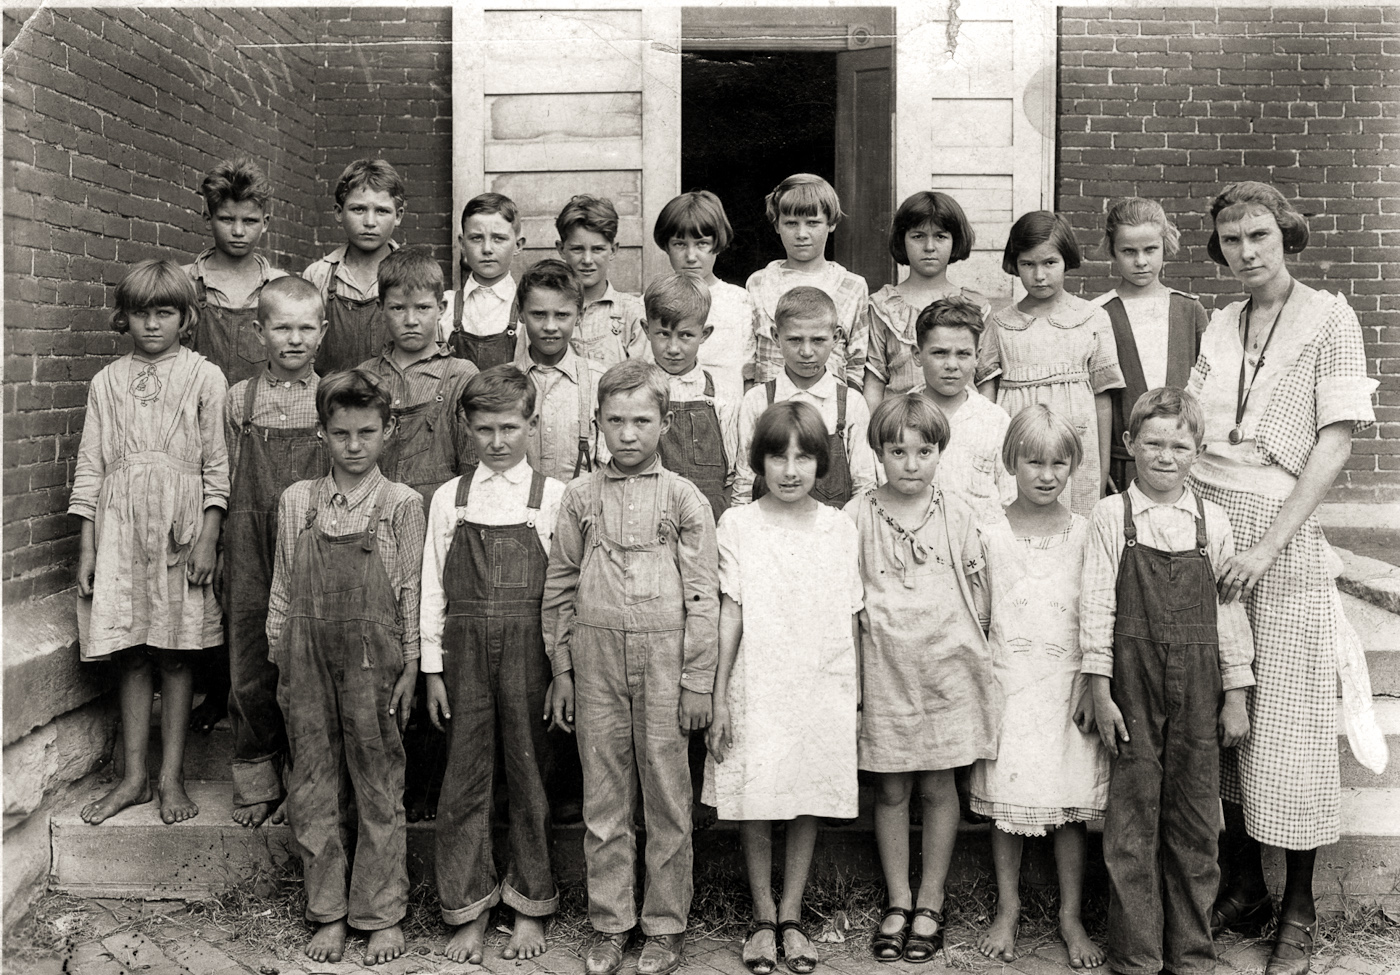 This photo has always been one of my favorites. The capture of the "real" farm life in Foster, Missouri in the 20's. My grandmother, the girl in the top row, third from the right, and her brother, front row left, are in this class. The poor children, barefoot, with dirty clothes, impetigo on their little faces and the look of the school marm are classic to me. View full size.